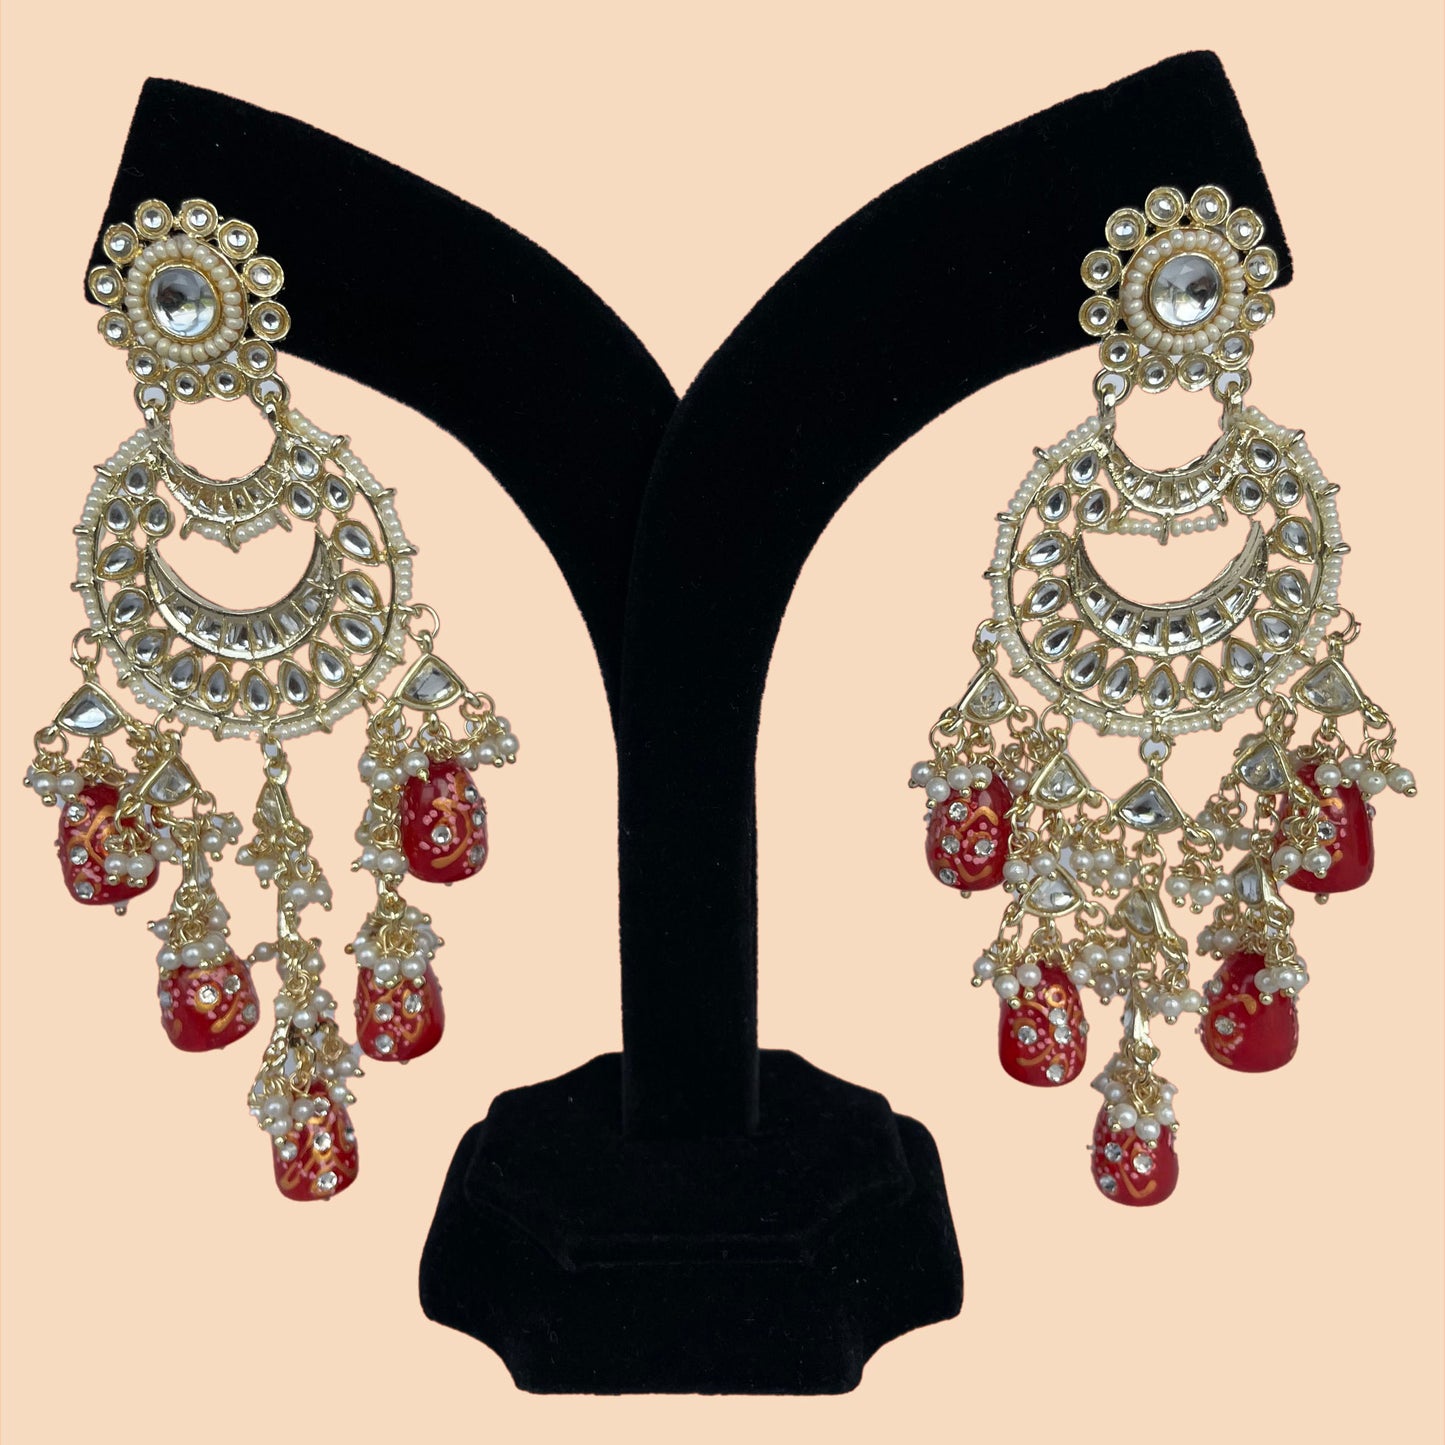 White Chandbalis with Red Drops